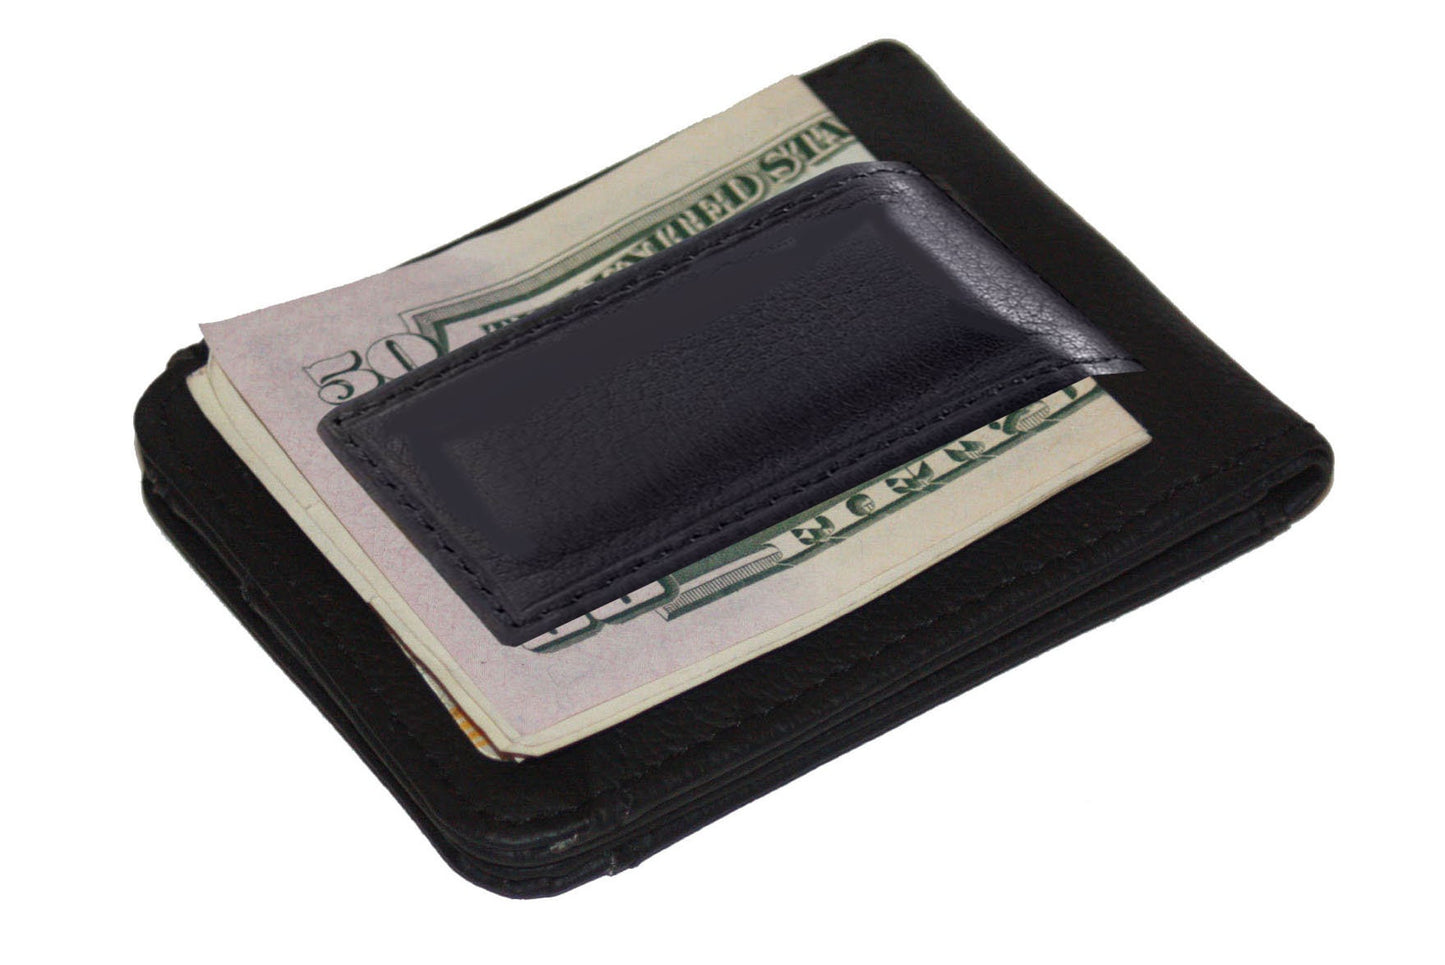 RFID Signal Blocking Black Cowhide Leather Mens Bifold Magnetic Money Clip